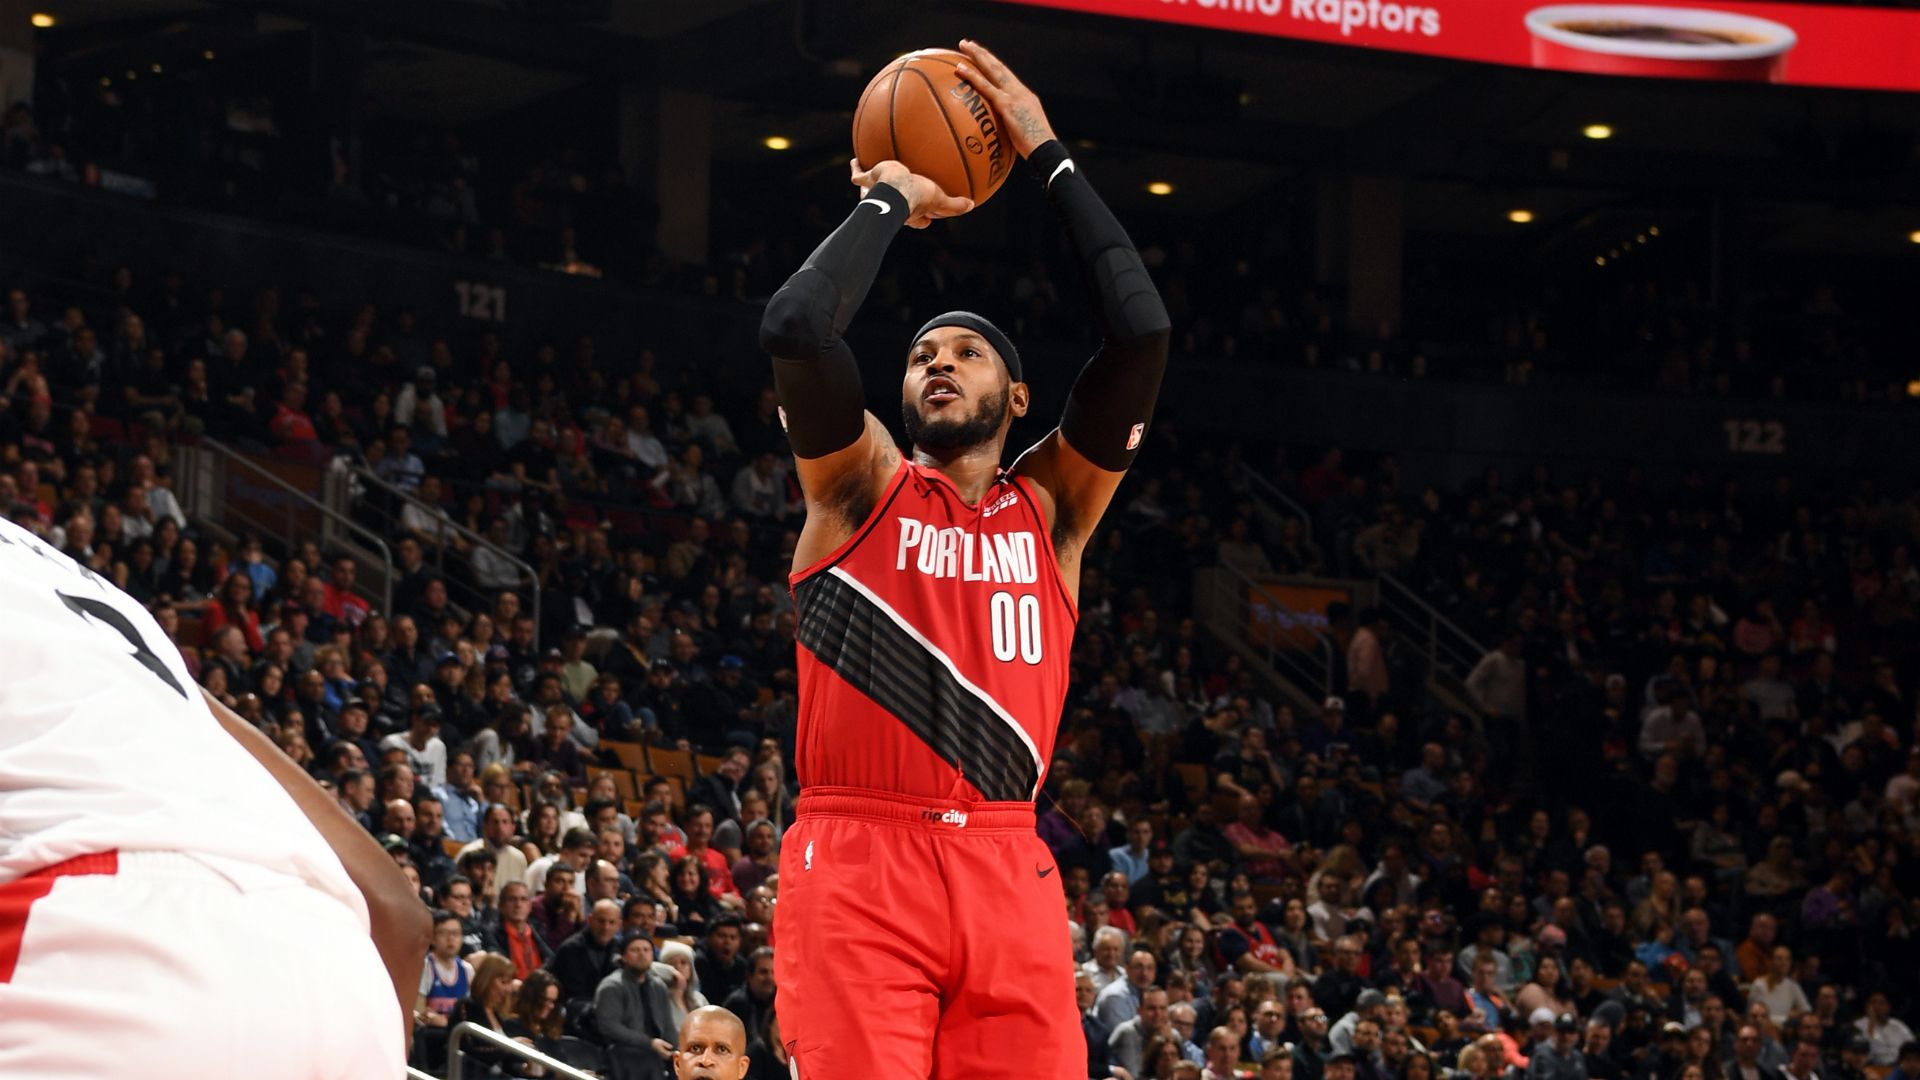 Nine Thoughts: Carmelo Anthony's Game Winner Caps Portland Trail